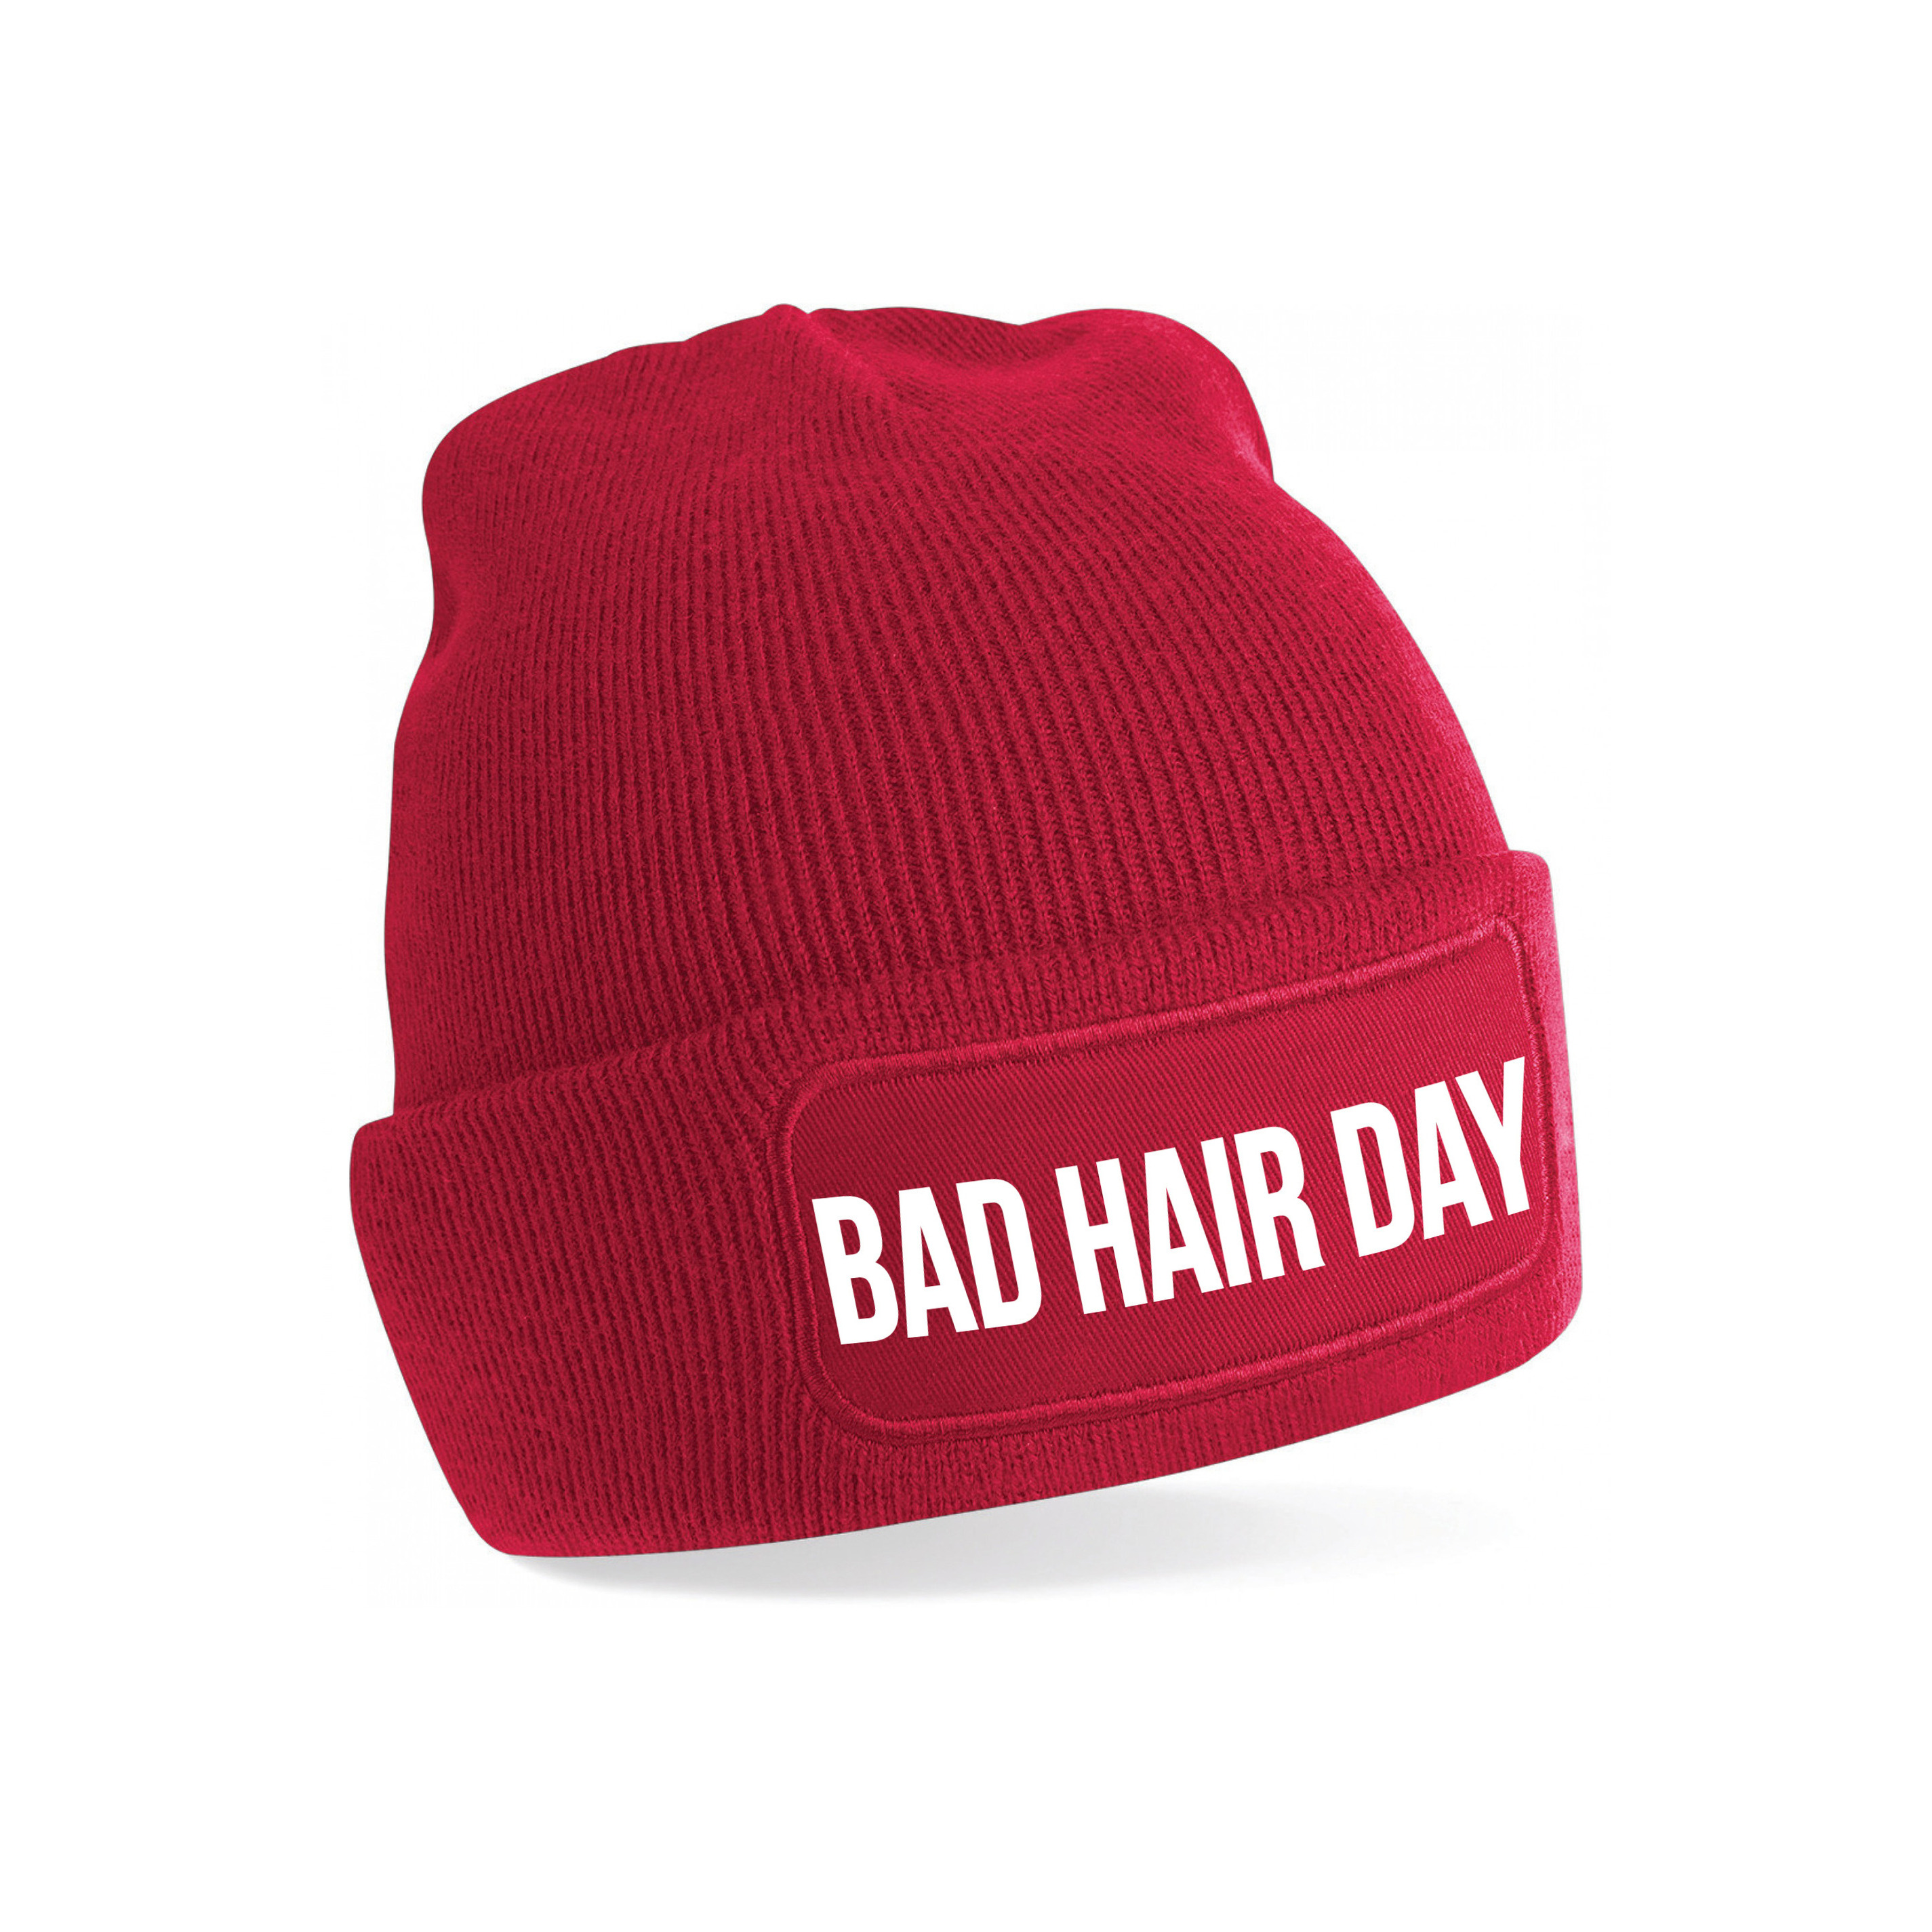 Bad hair day muts unisex one size Rood